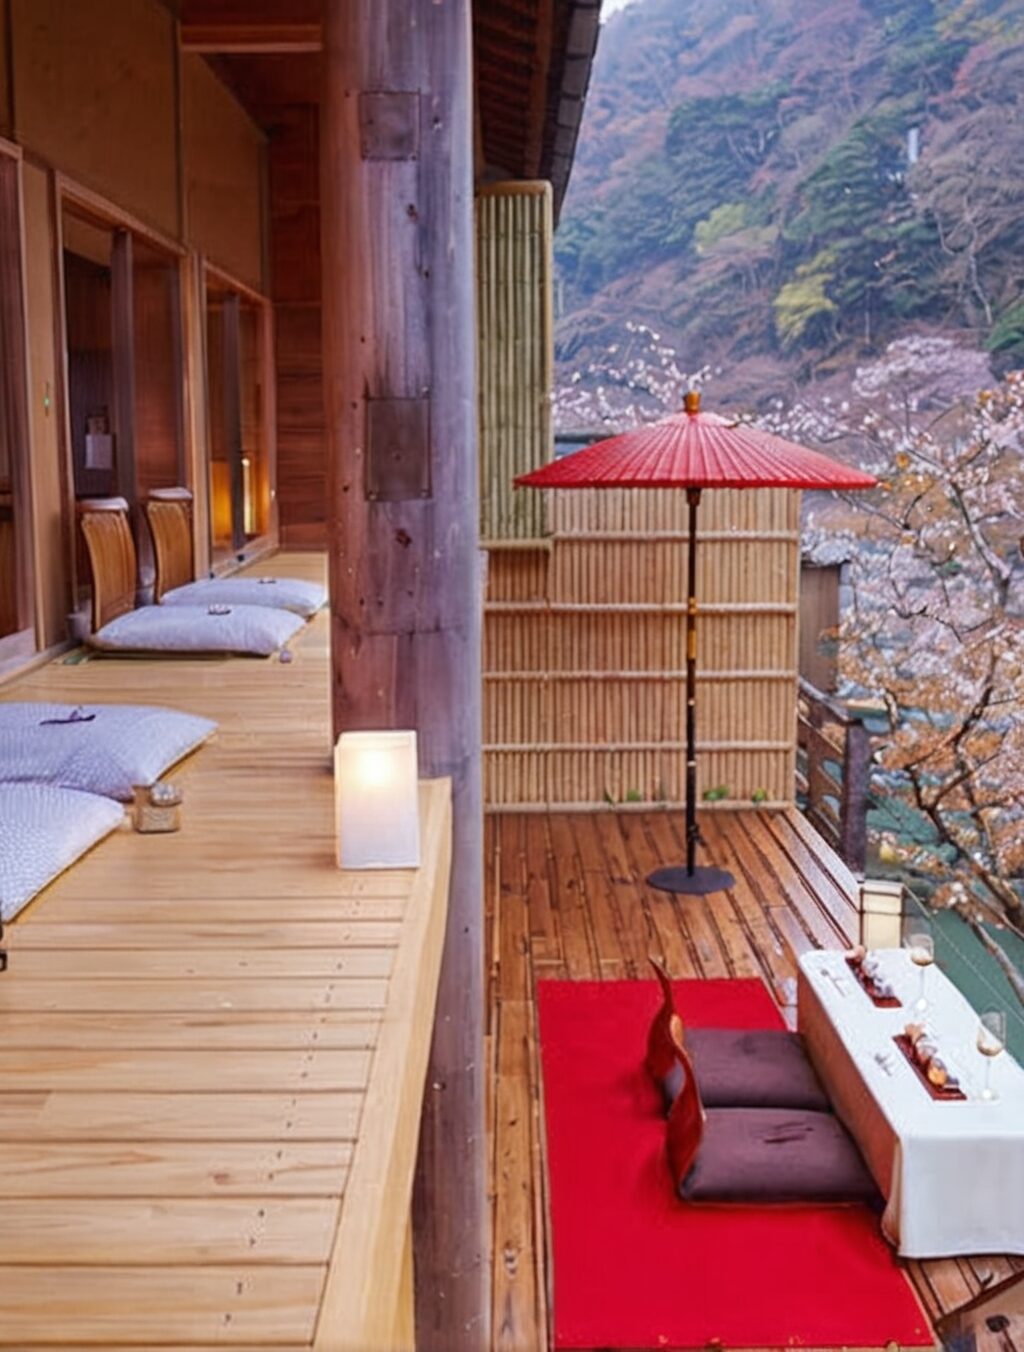 where to book hotels japan reddit